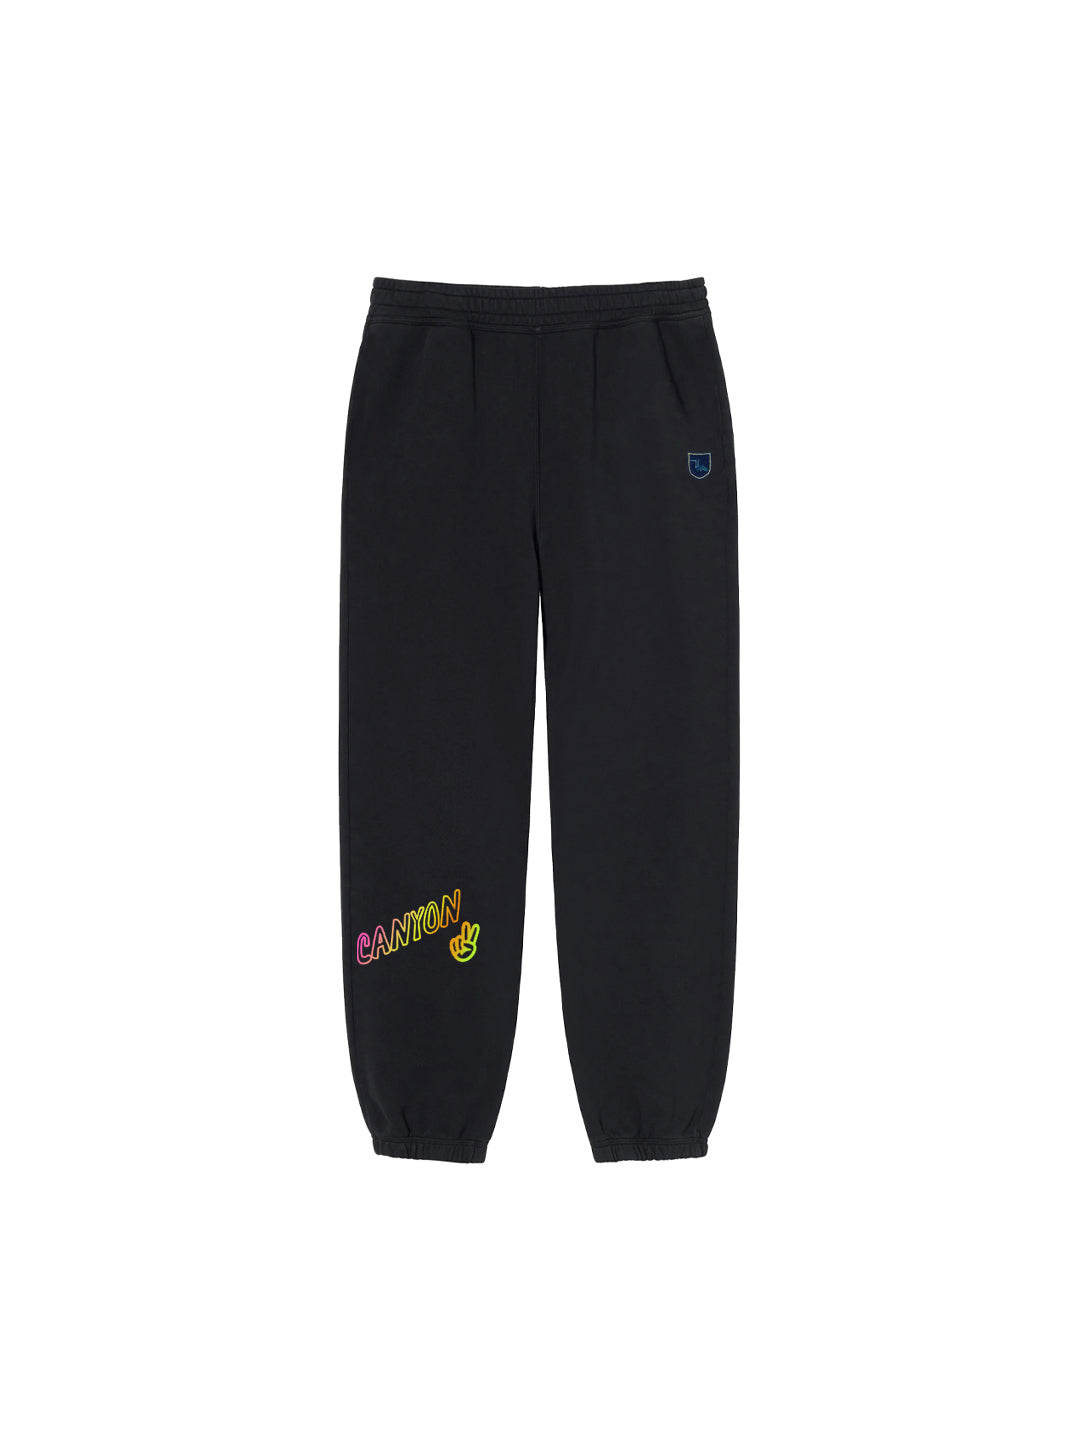 Neon Canyon Youth Sweatpants in Black